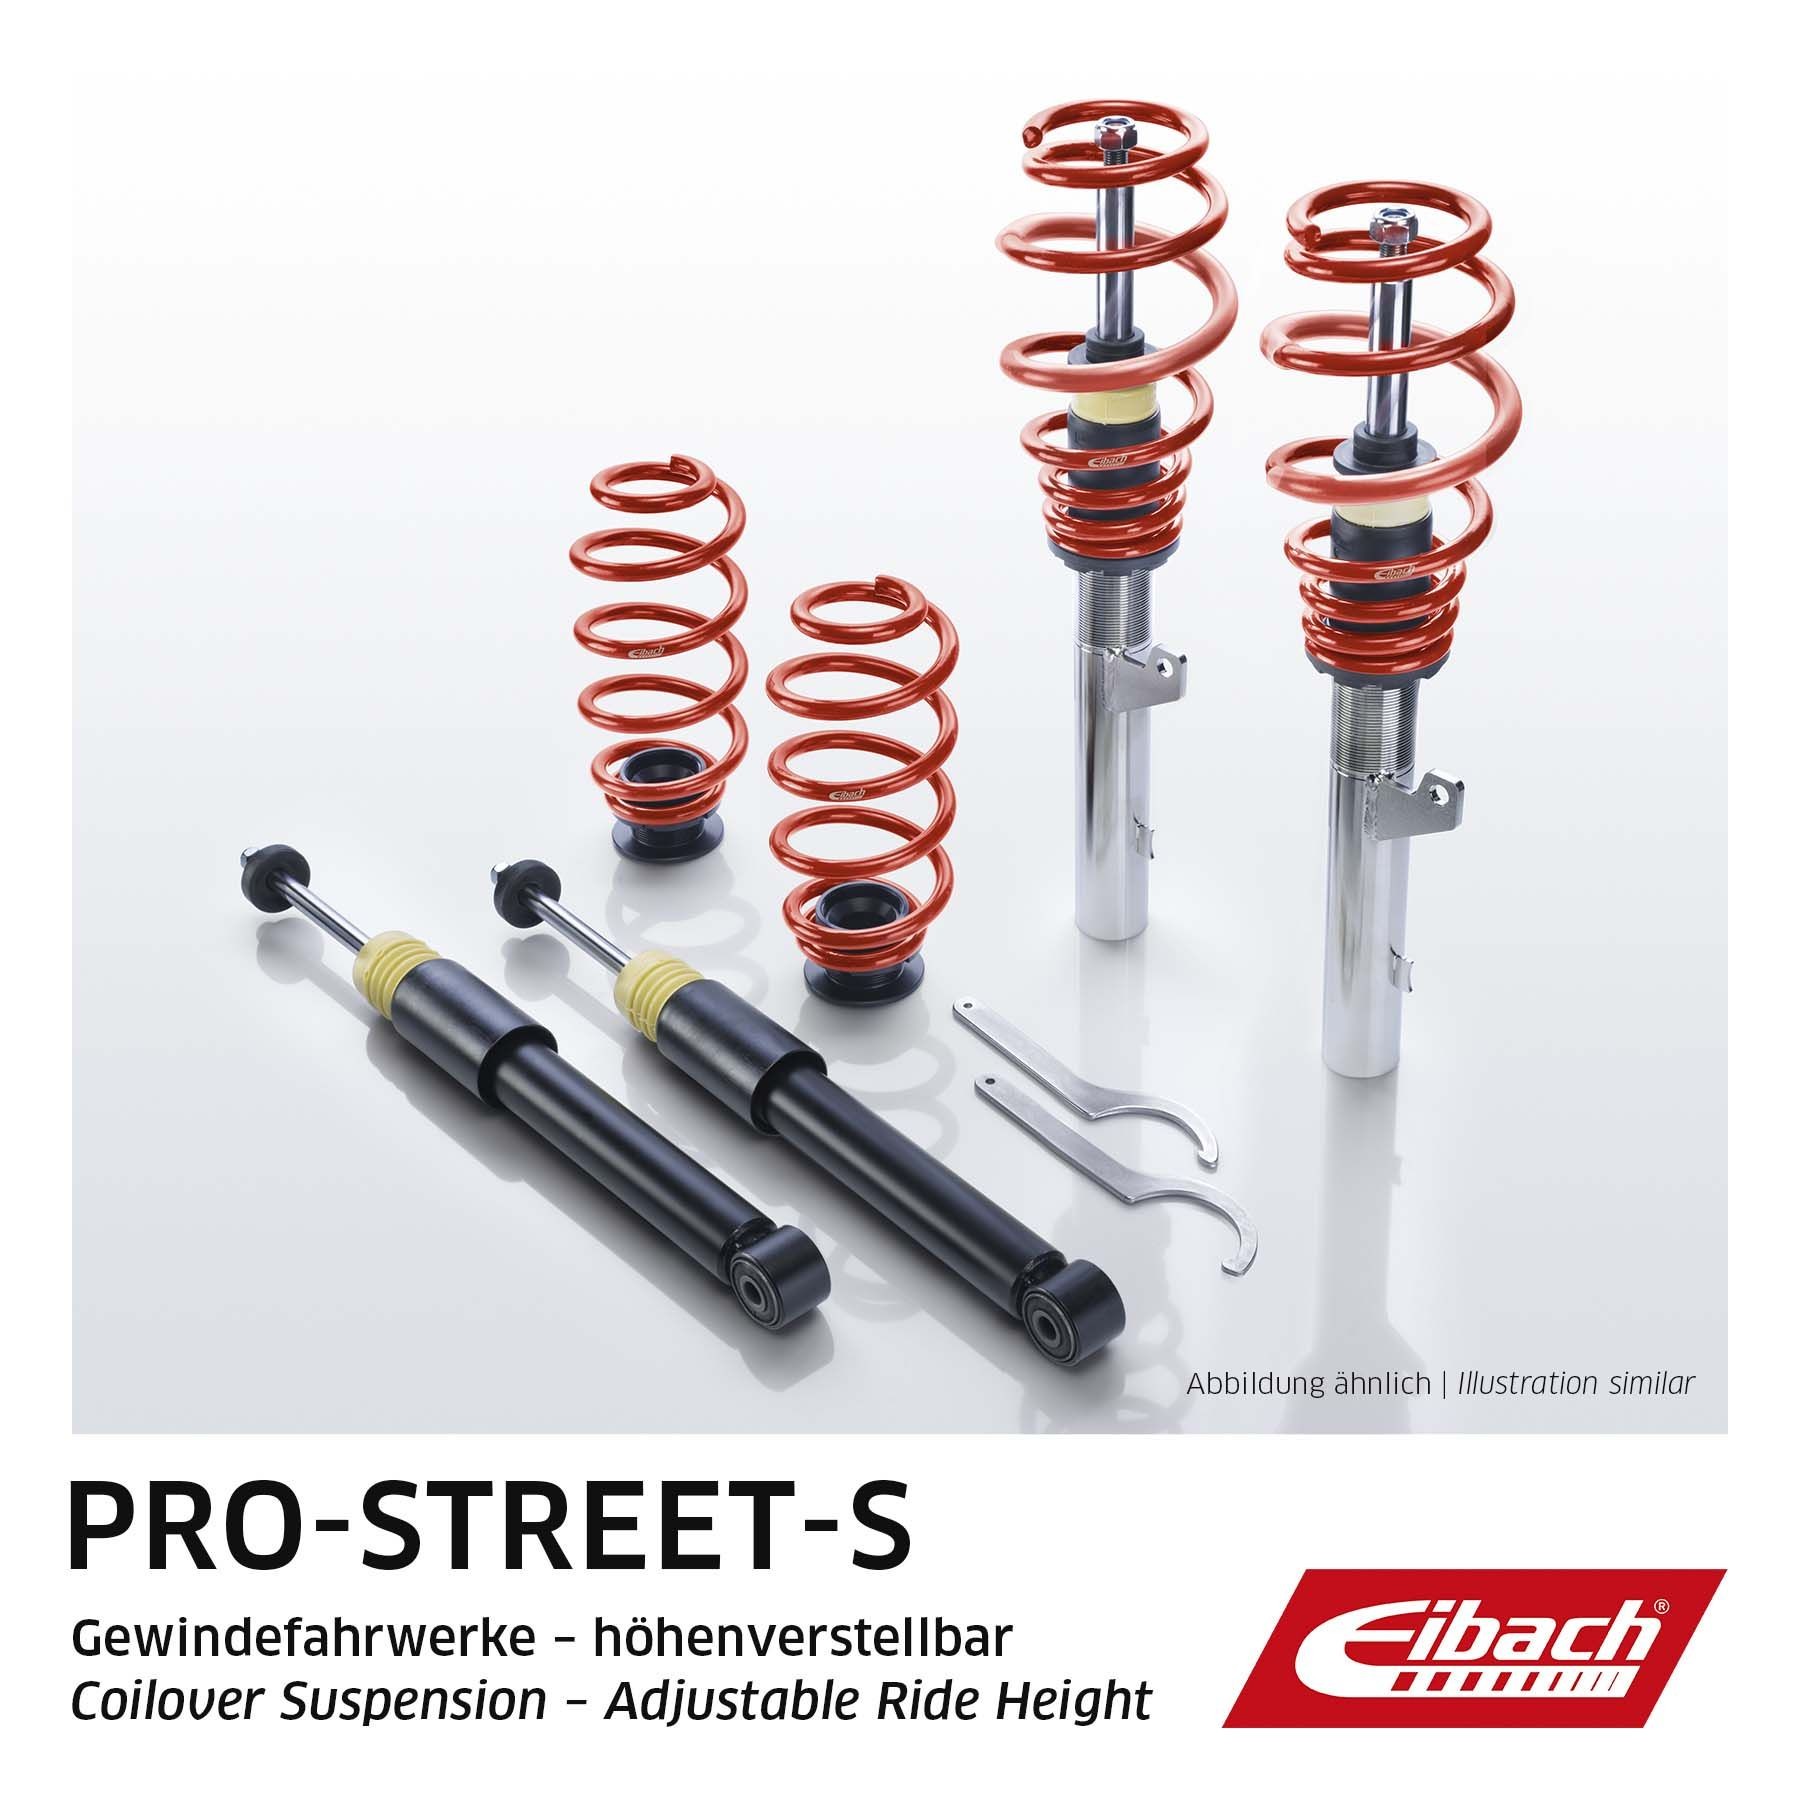 65850020322 EIBACH Pro-Street-S PSS65850020322 Suspension kit, coil springs / shock absorbers Passat 3b2 1.8 Syncro/4motion 125 hp Petrol 1998 price